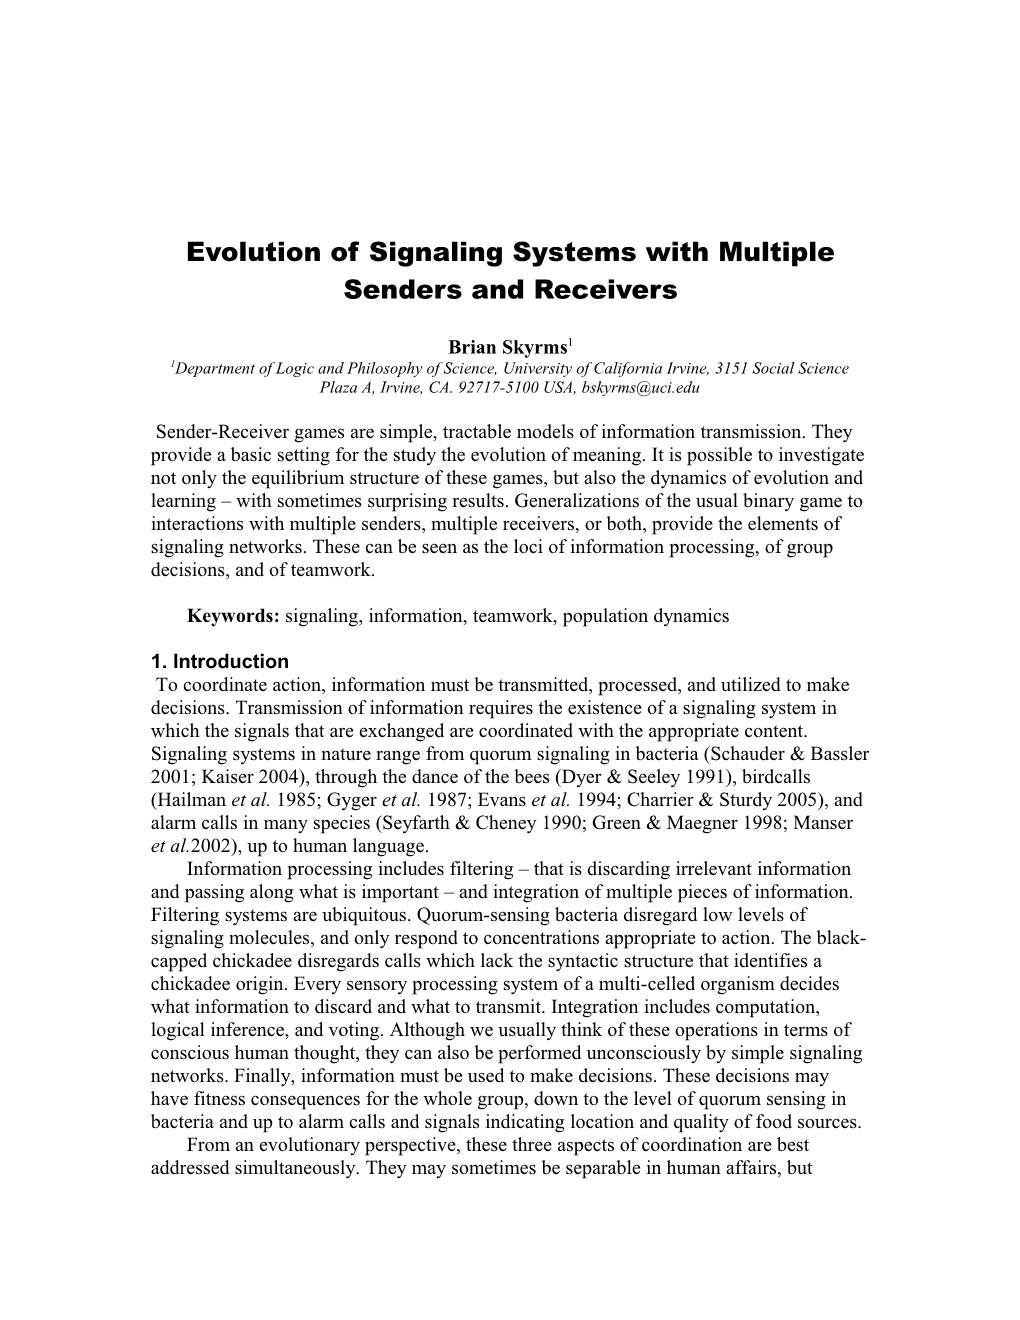 Evolution of Signaling Systems with Multiple Senders and Receivers